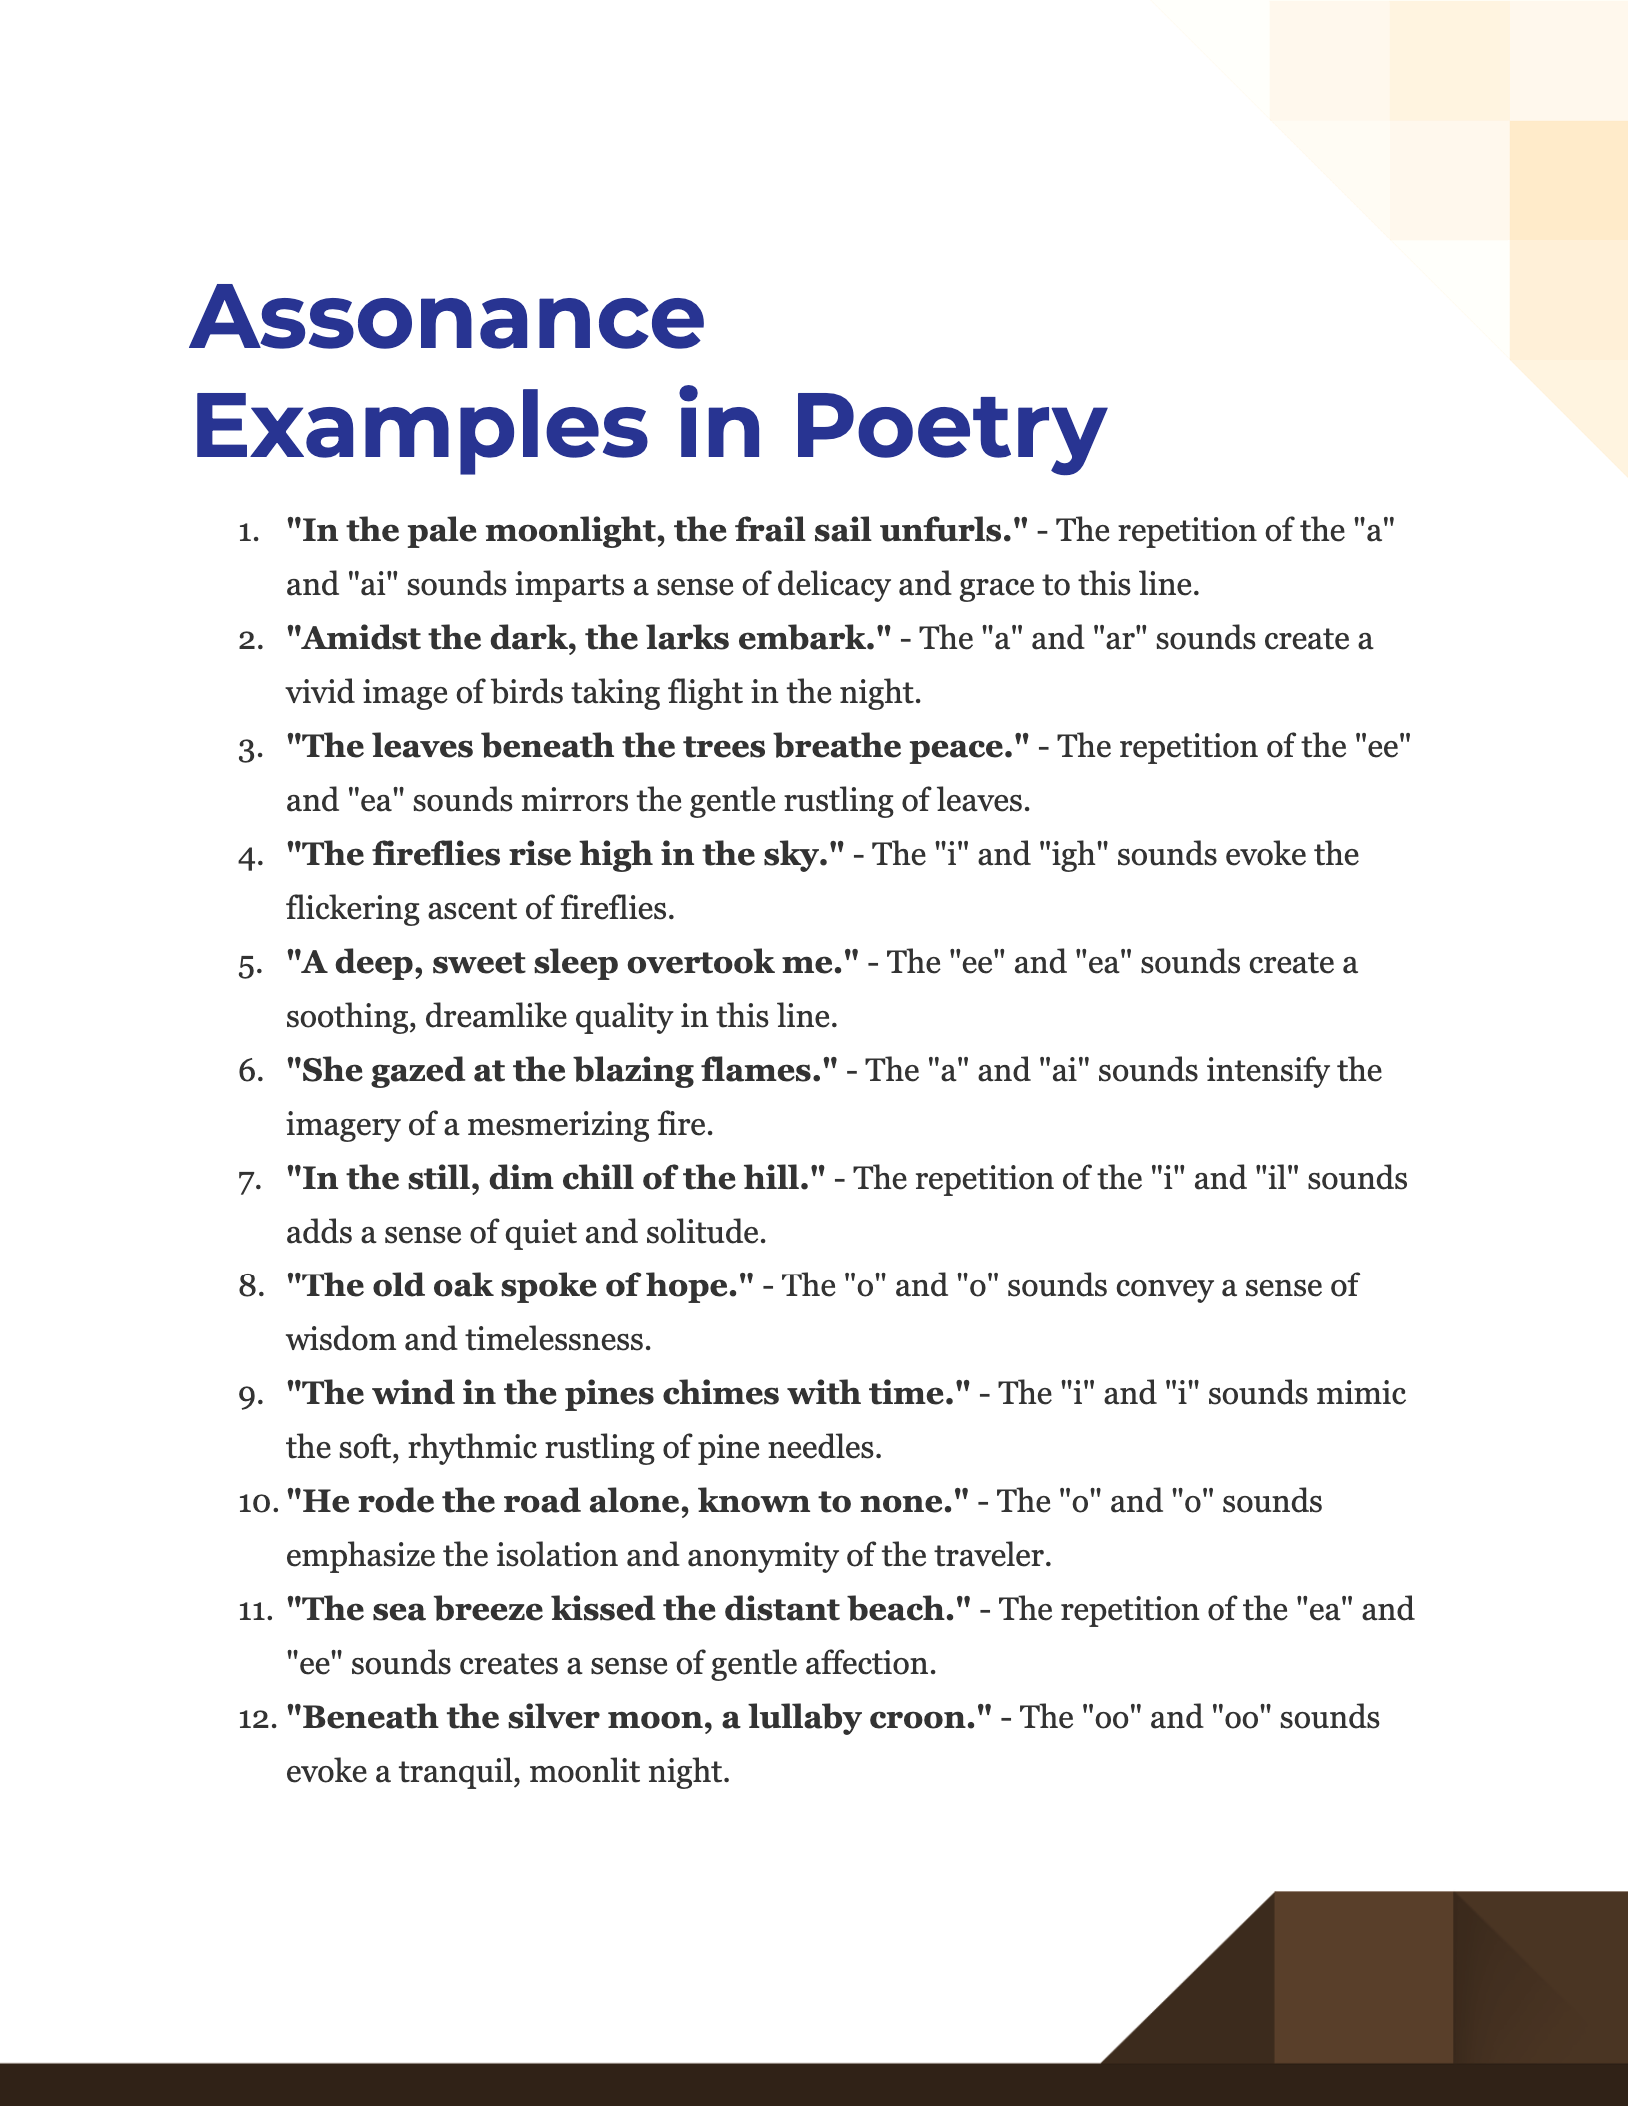 Assonance in Poetry Examples